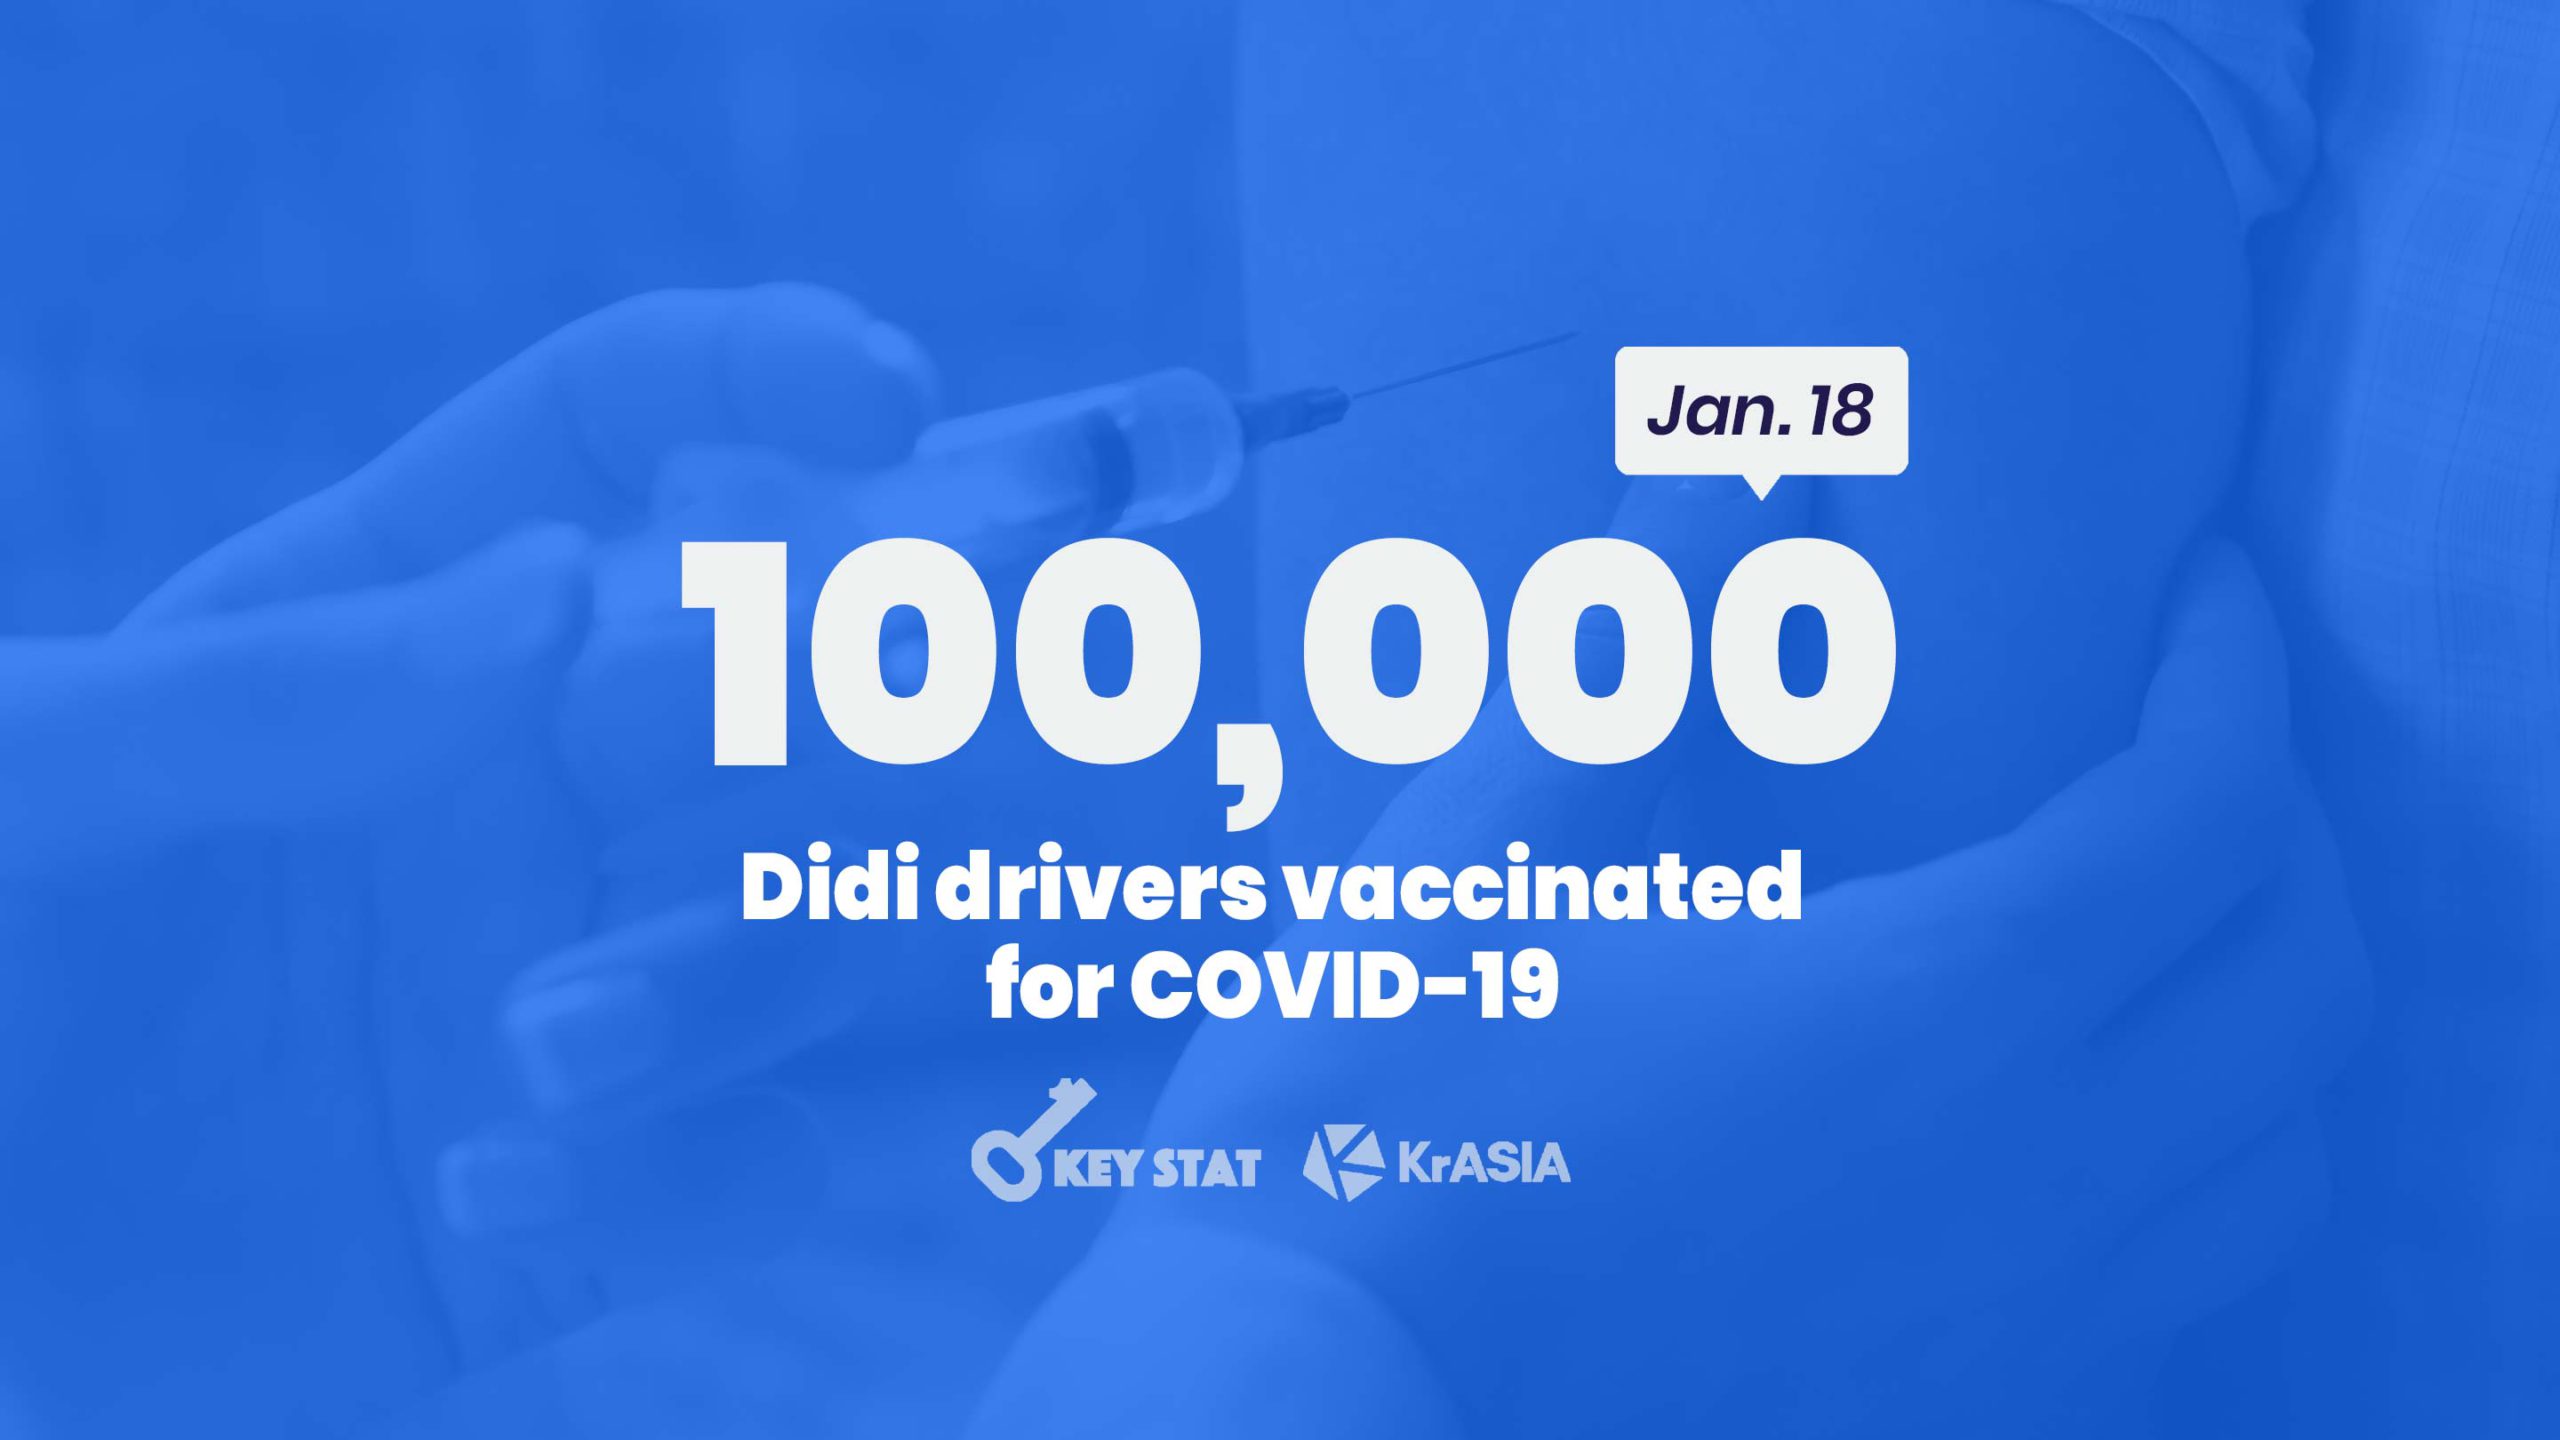 KEY STAT | Didi is stepping up vaccinations of its drivers in Beijing